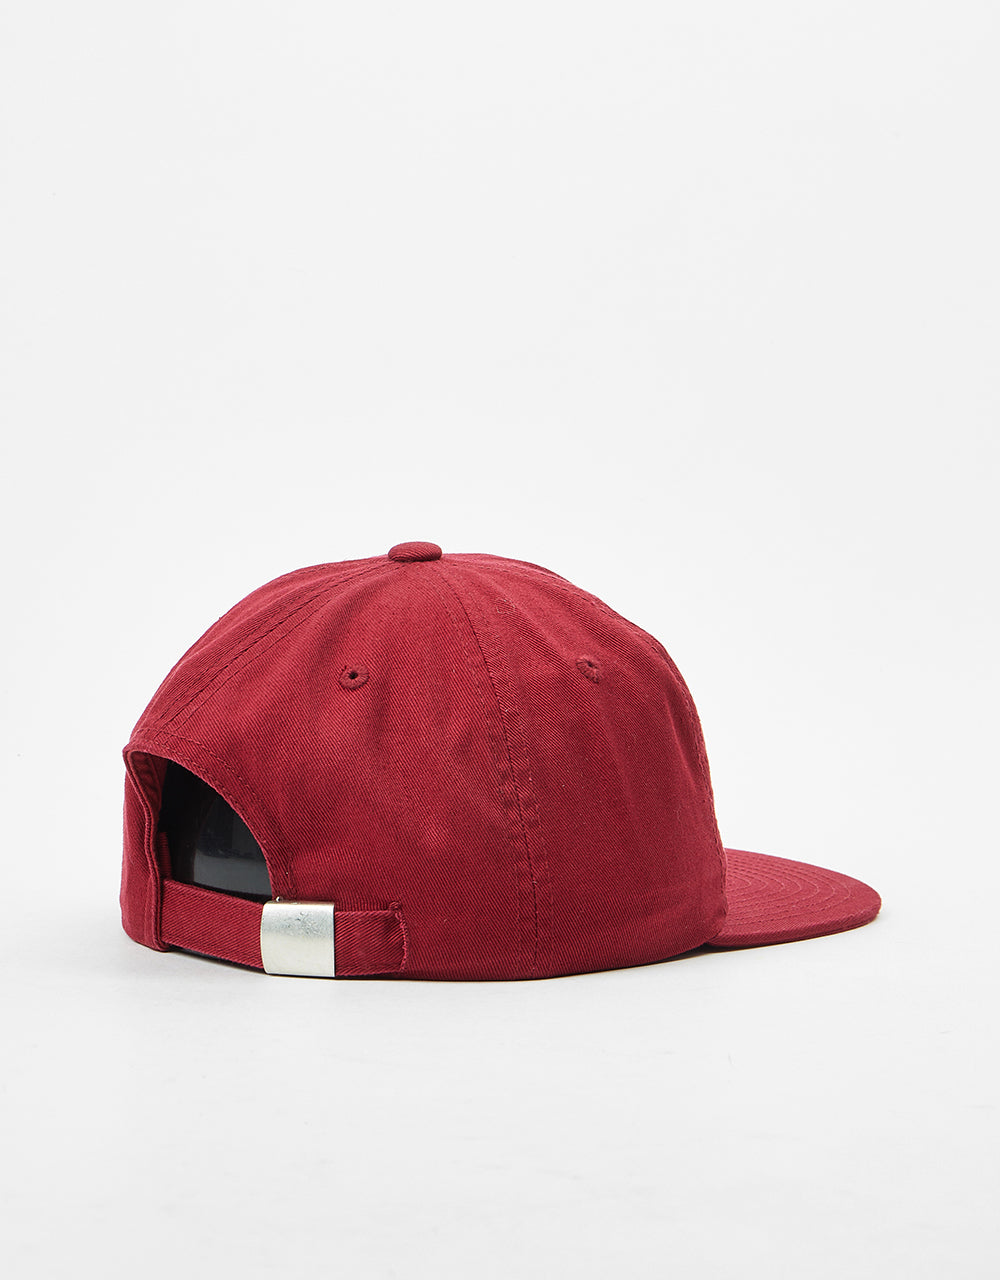 Route One 6 Panel (Unstructured) Cap - Burgundy